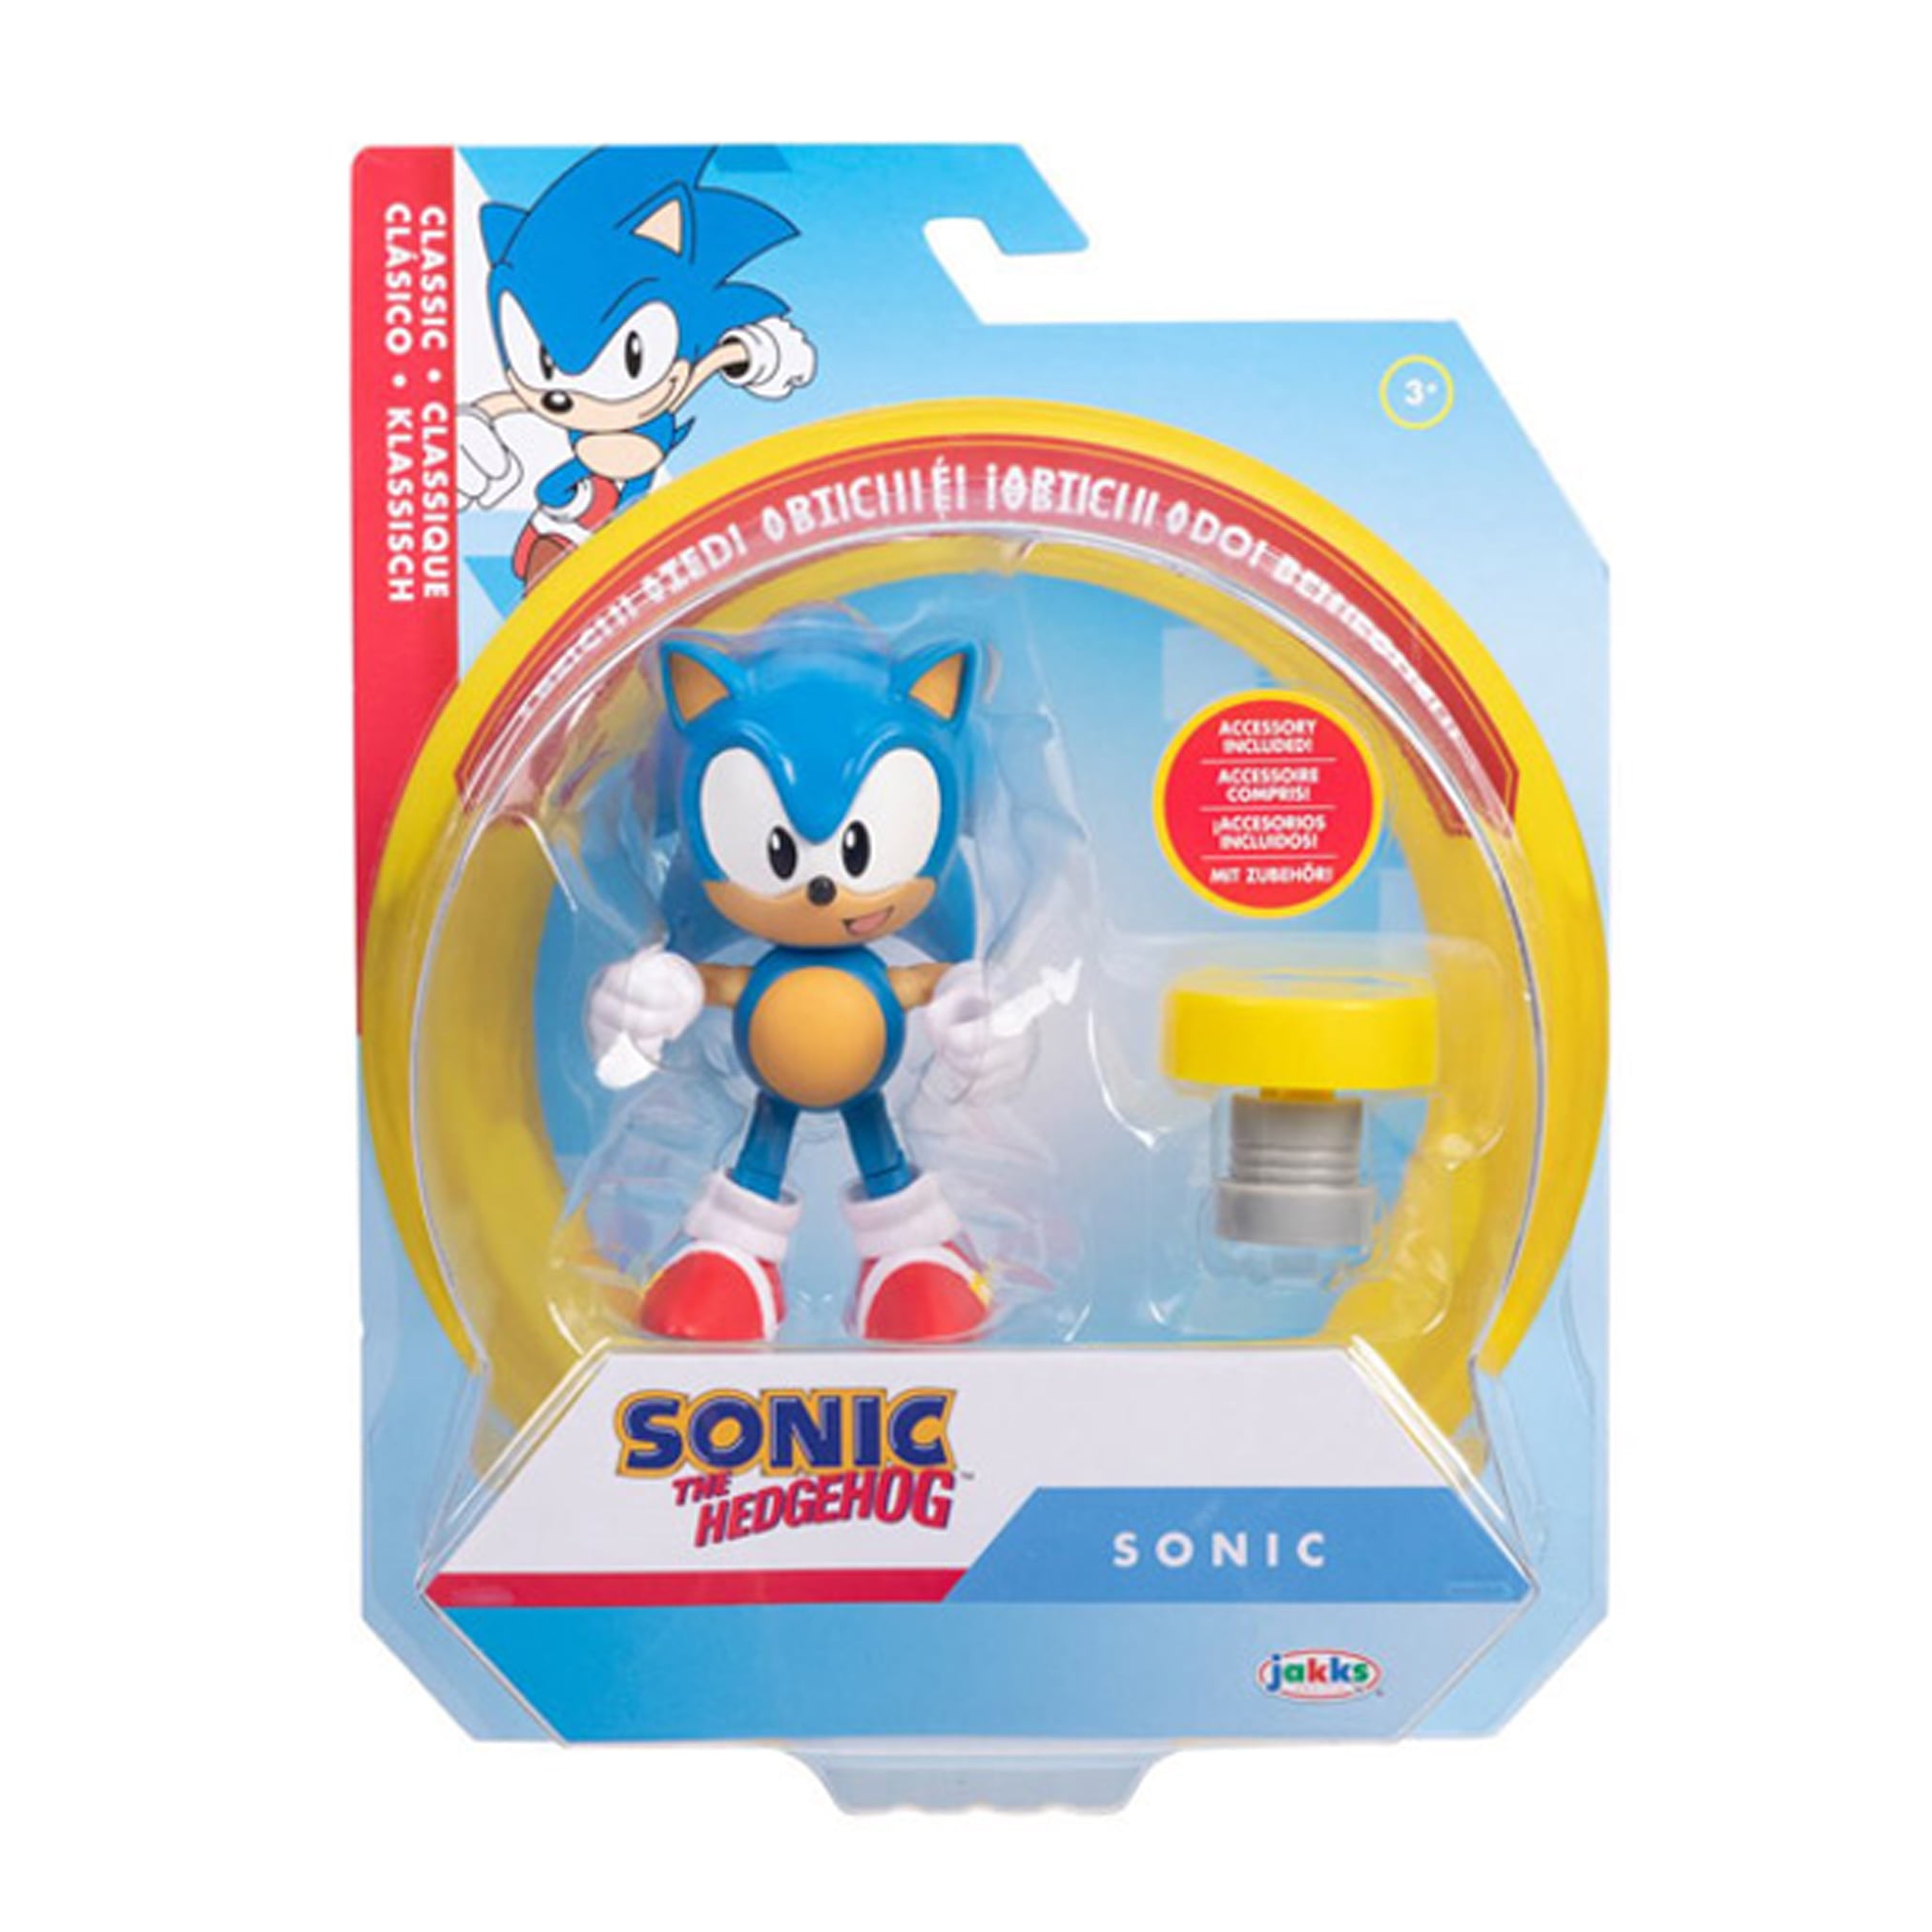 Sonic the Hedgehog Classic Sonic with Spring 